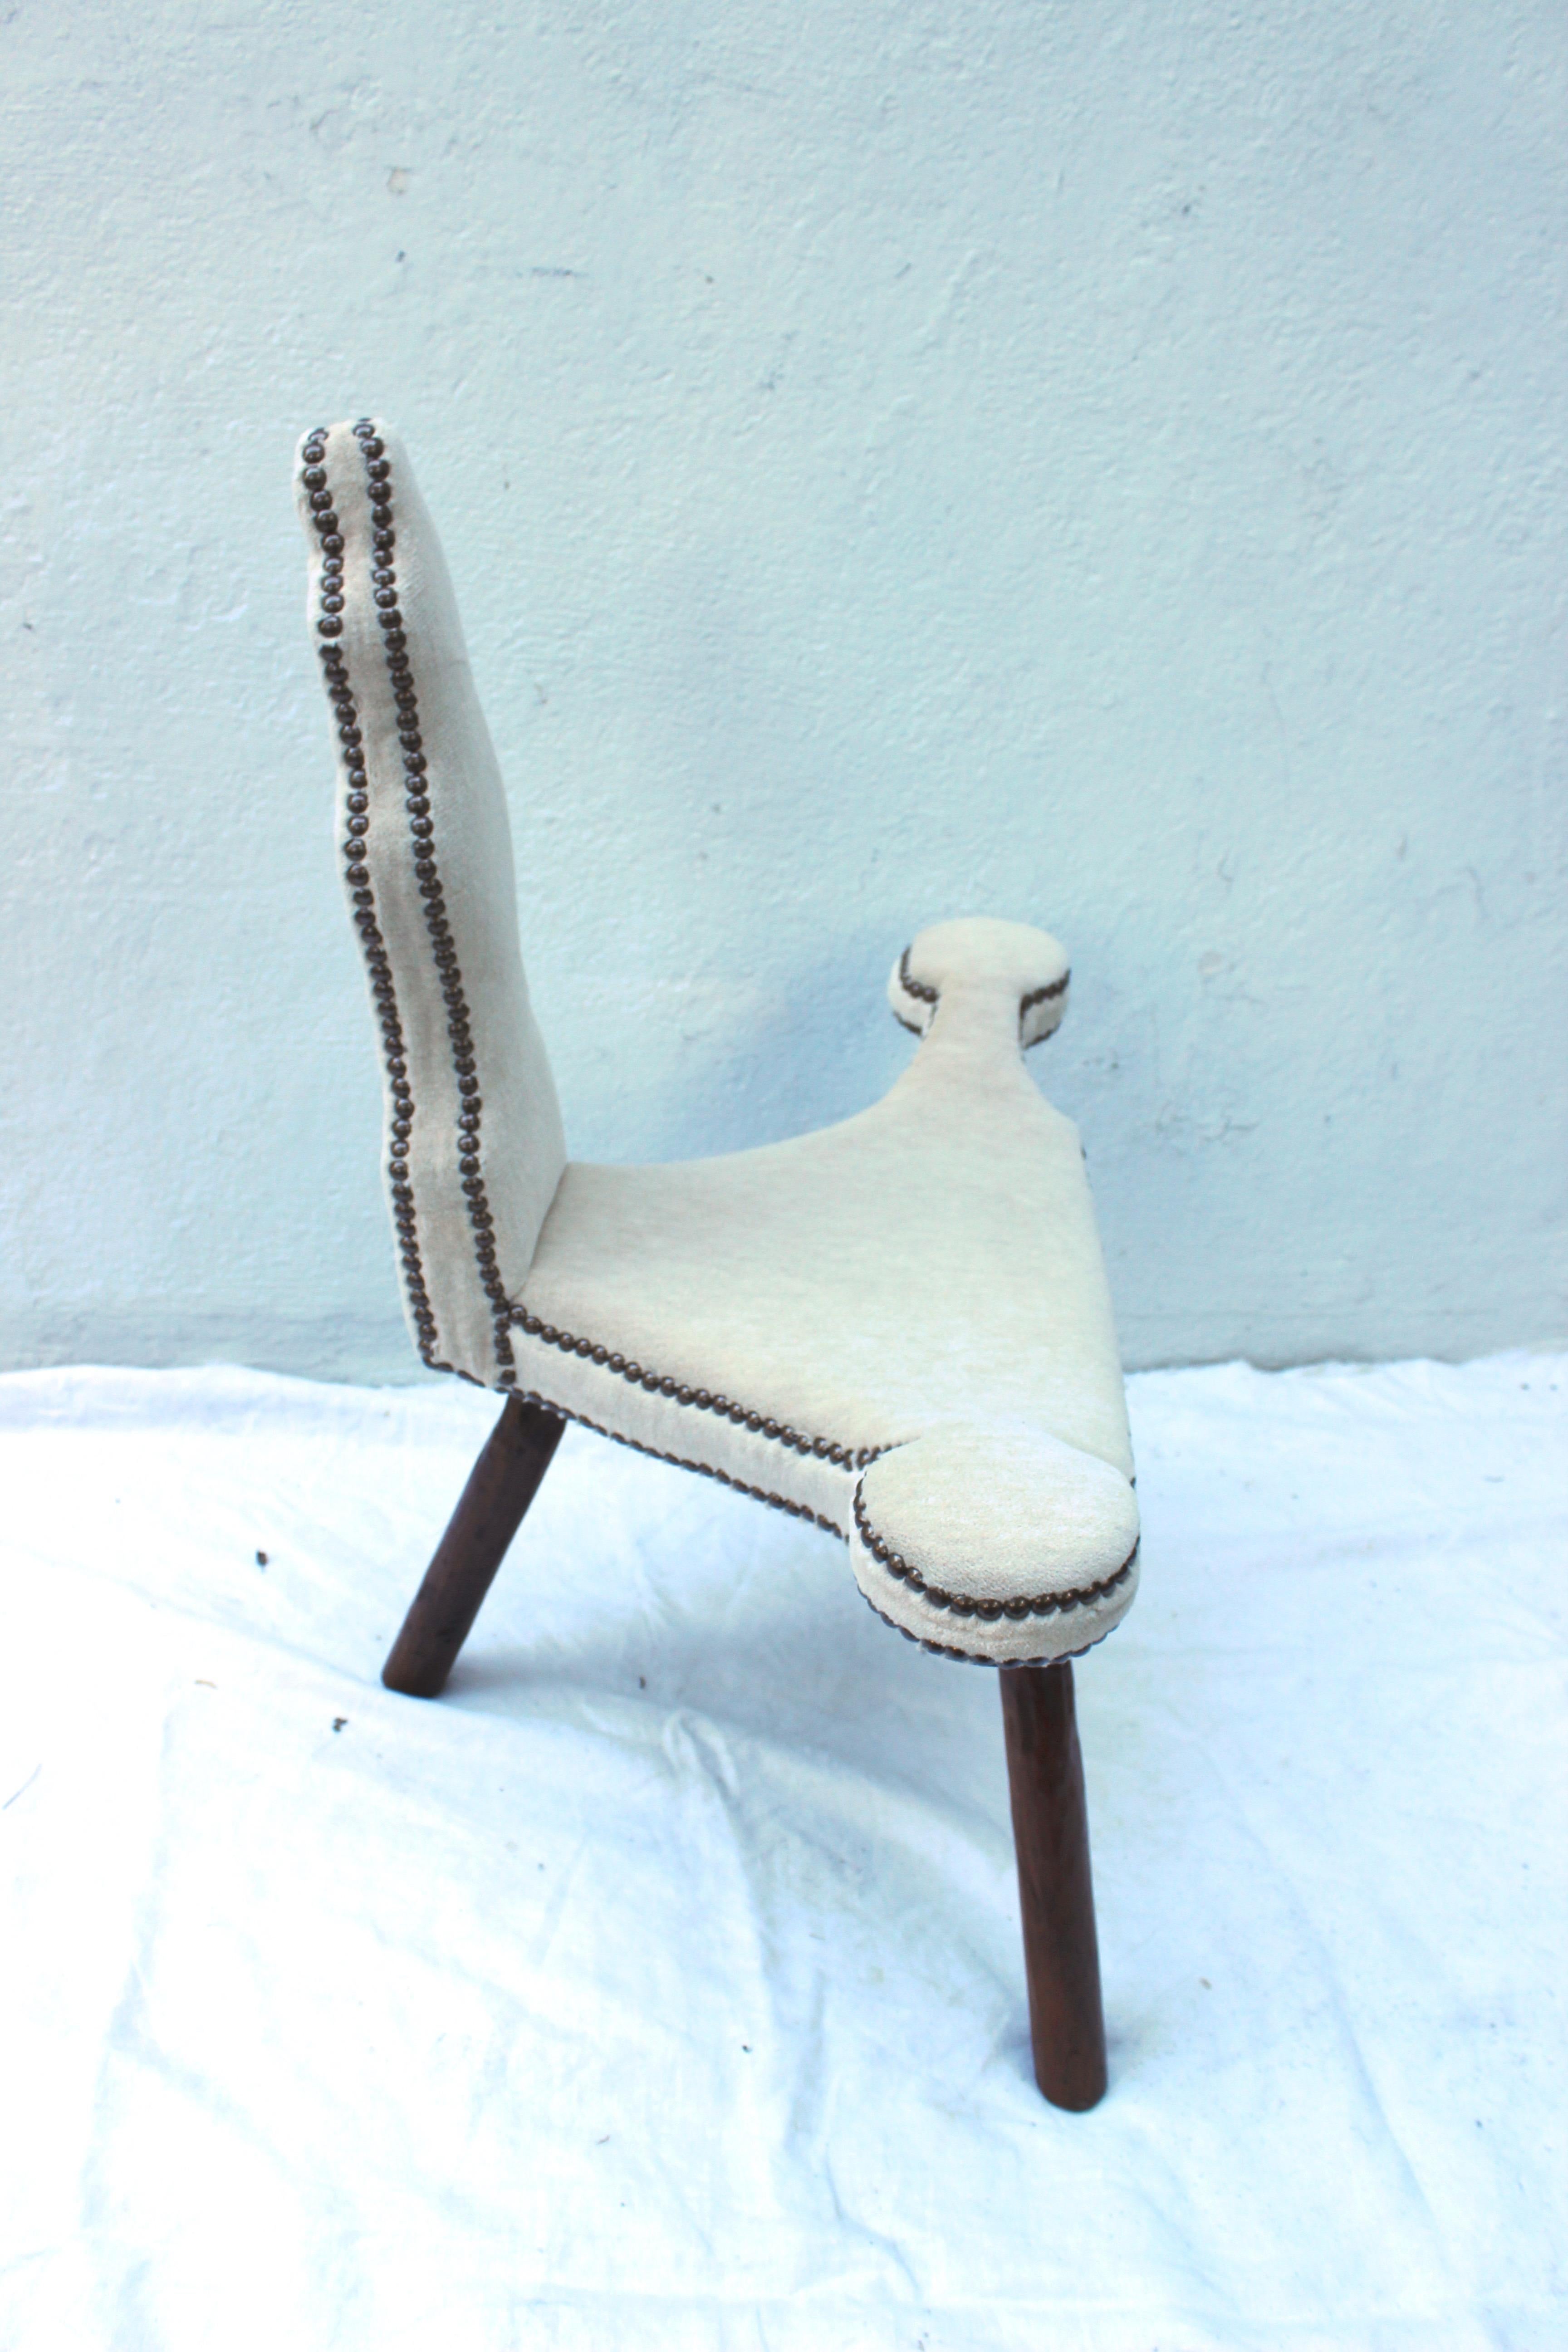 19th century Primitive three-legged wood chair newly upholstered in Alpaca velvet with bronze nailheads.